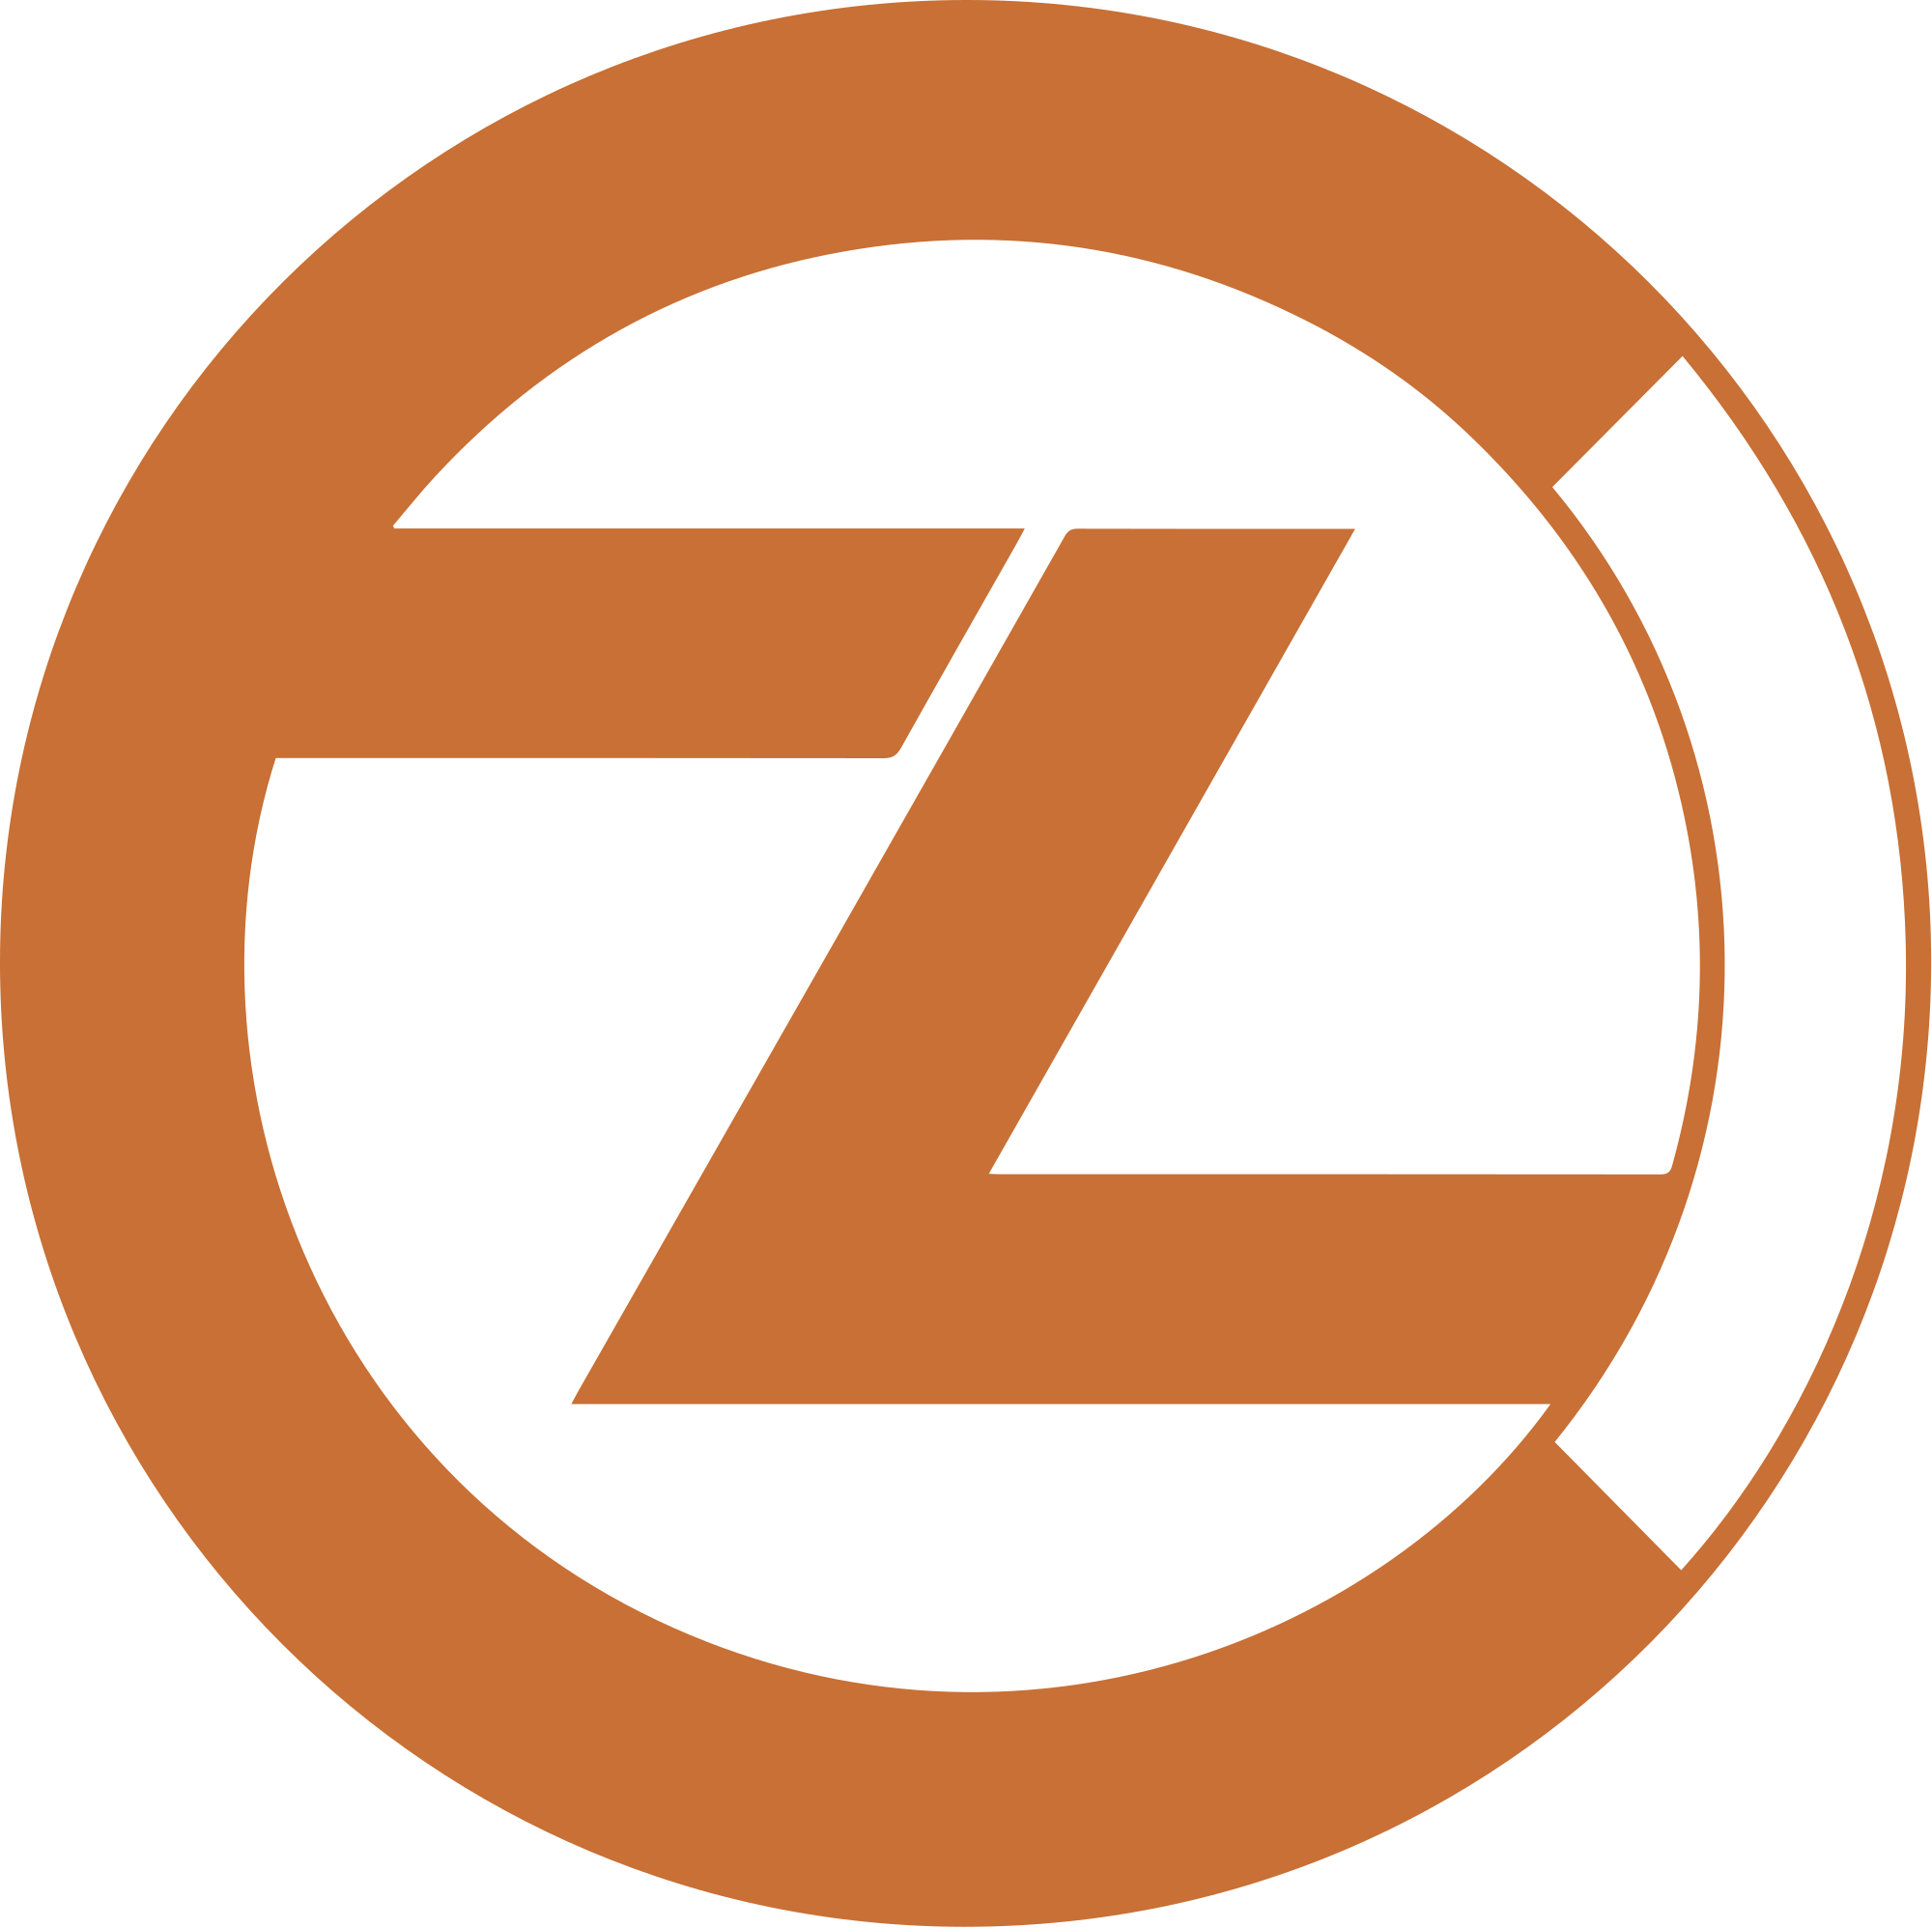 Trade Cryptocurrency Pairs - Zclassic Coin (2000x1996)